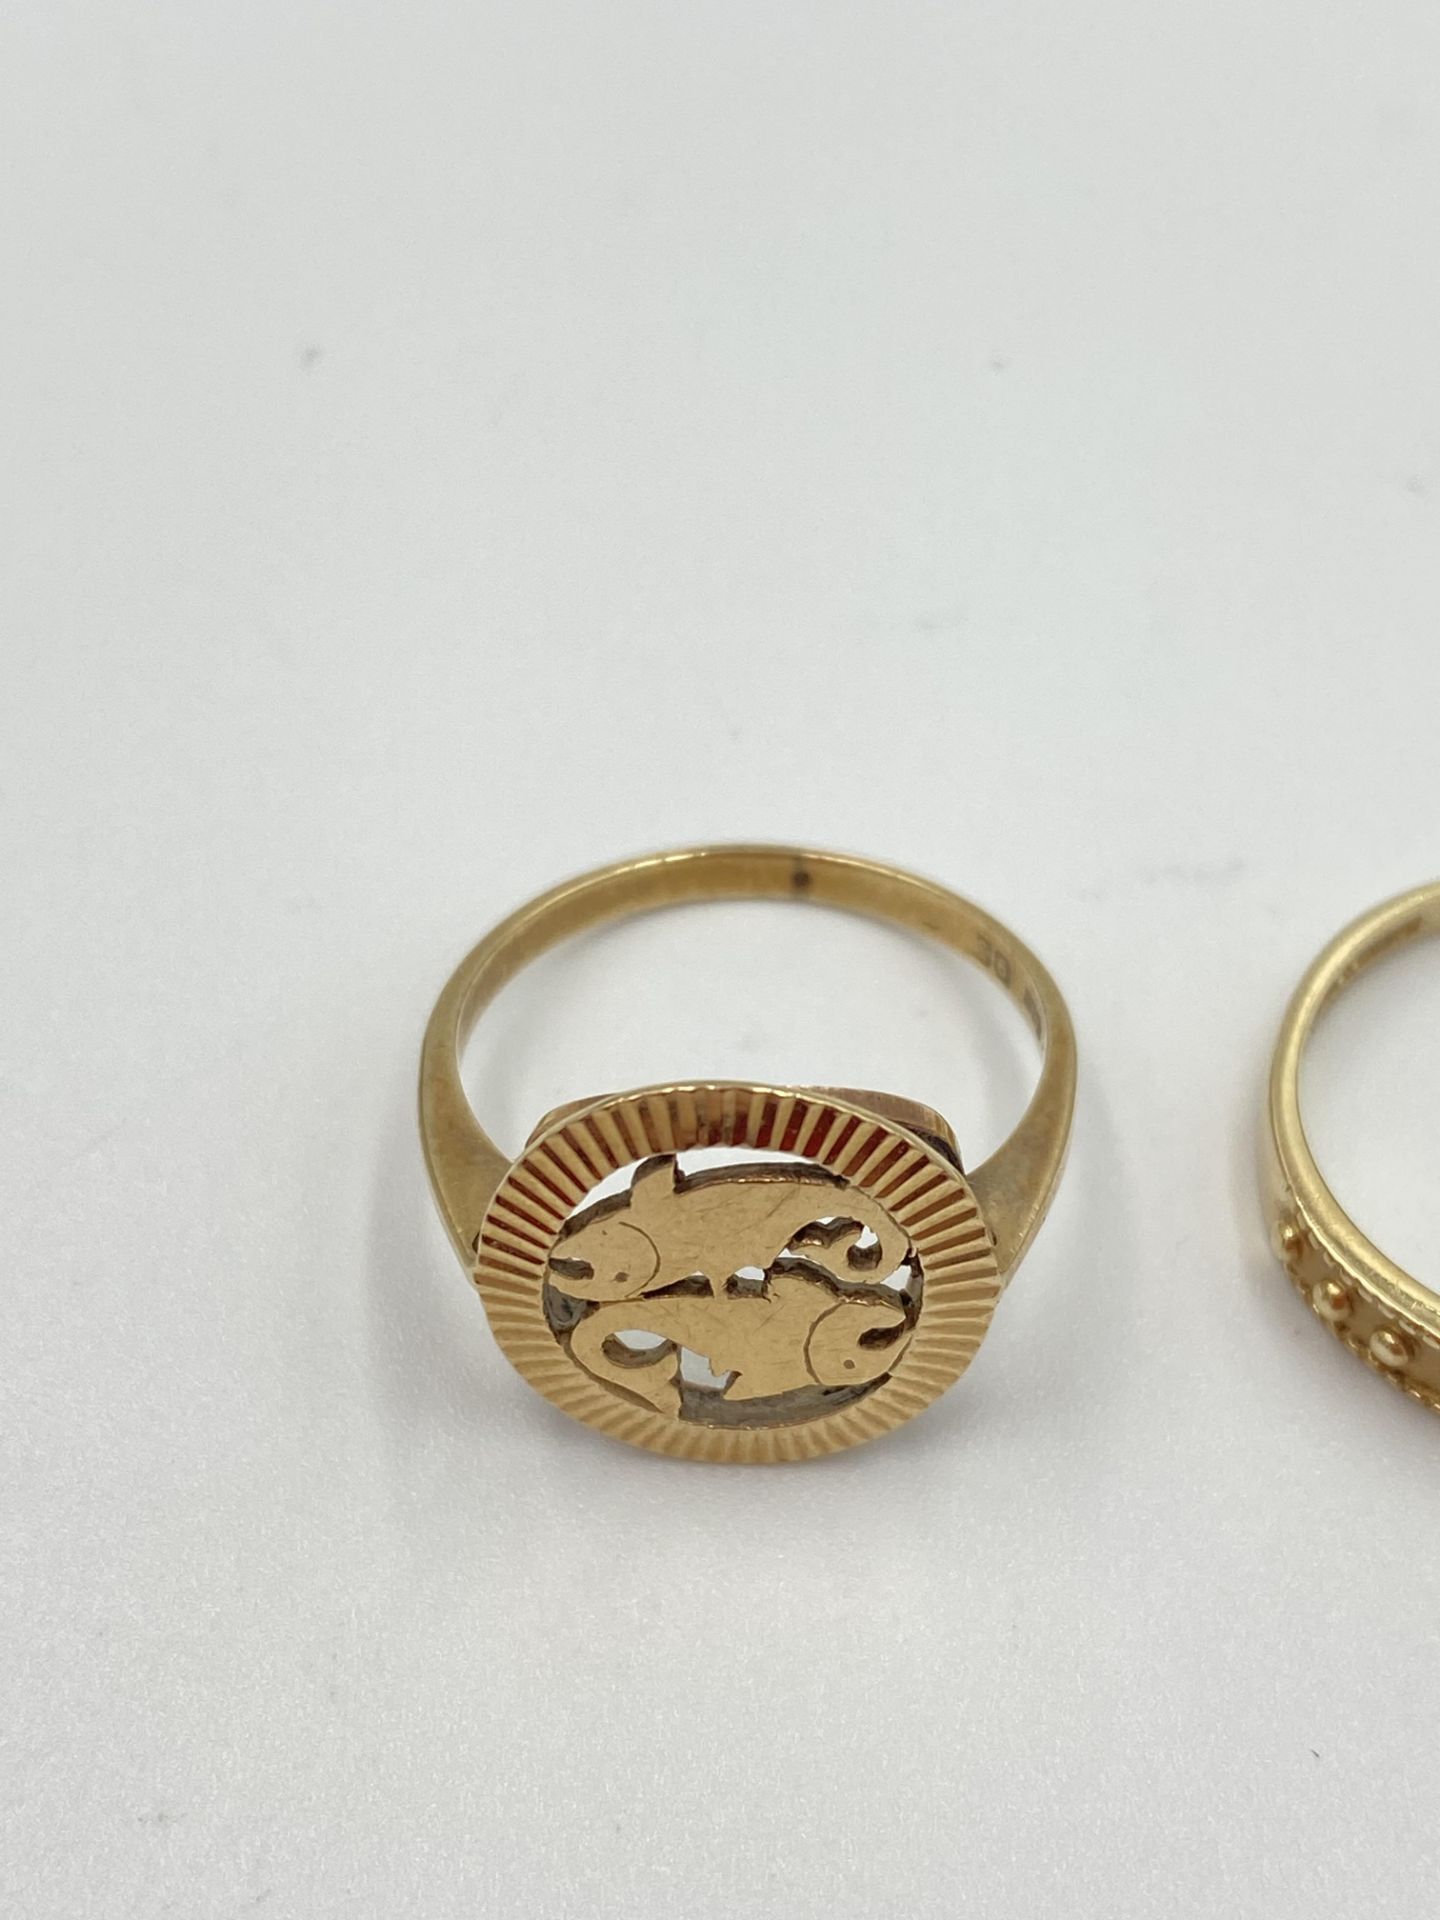 Three 9ct gold rings - Image 3 of 6